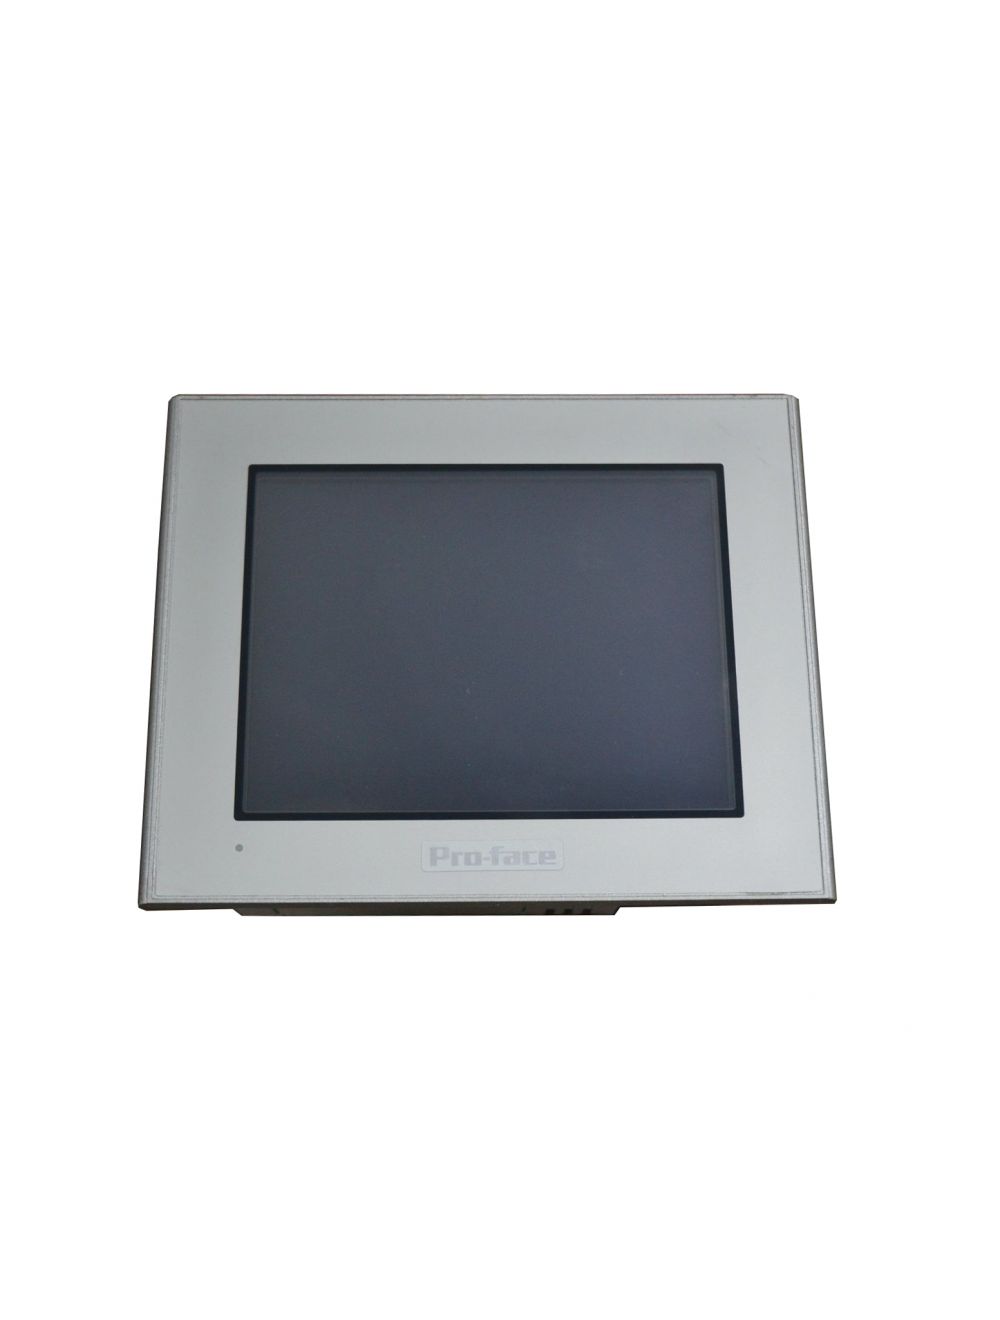 New In stock for sale, Pro-face HMI AGP3300-L1-D24-FN1M